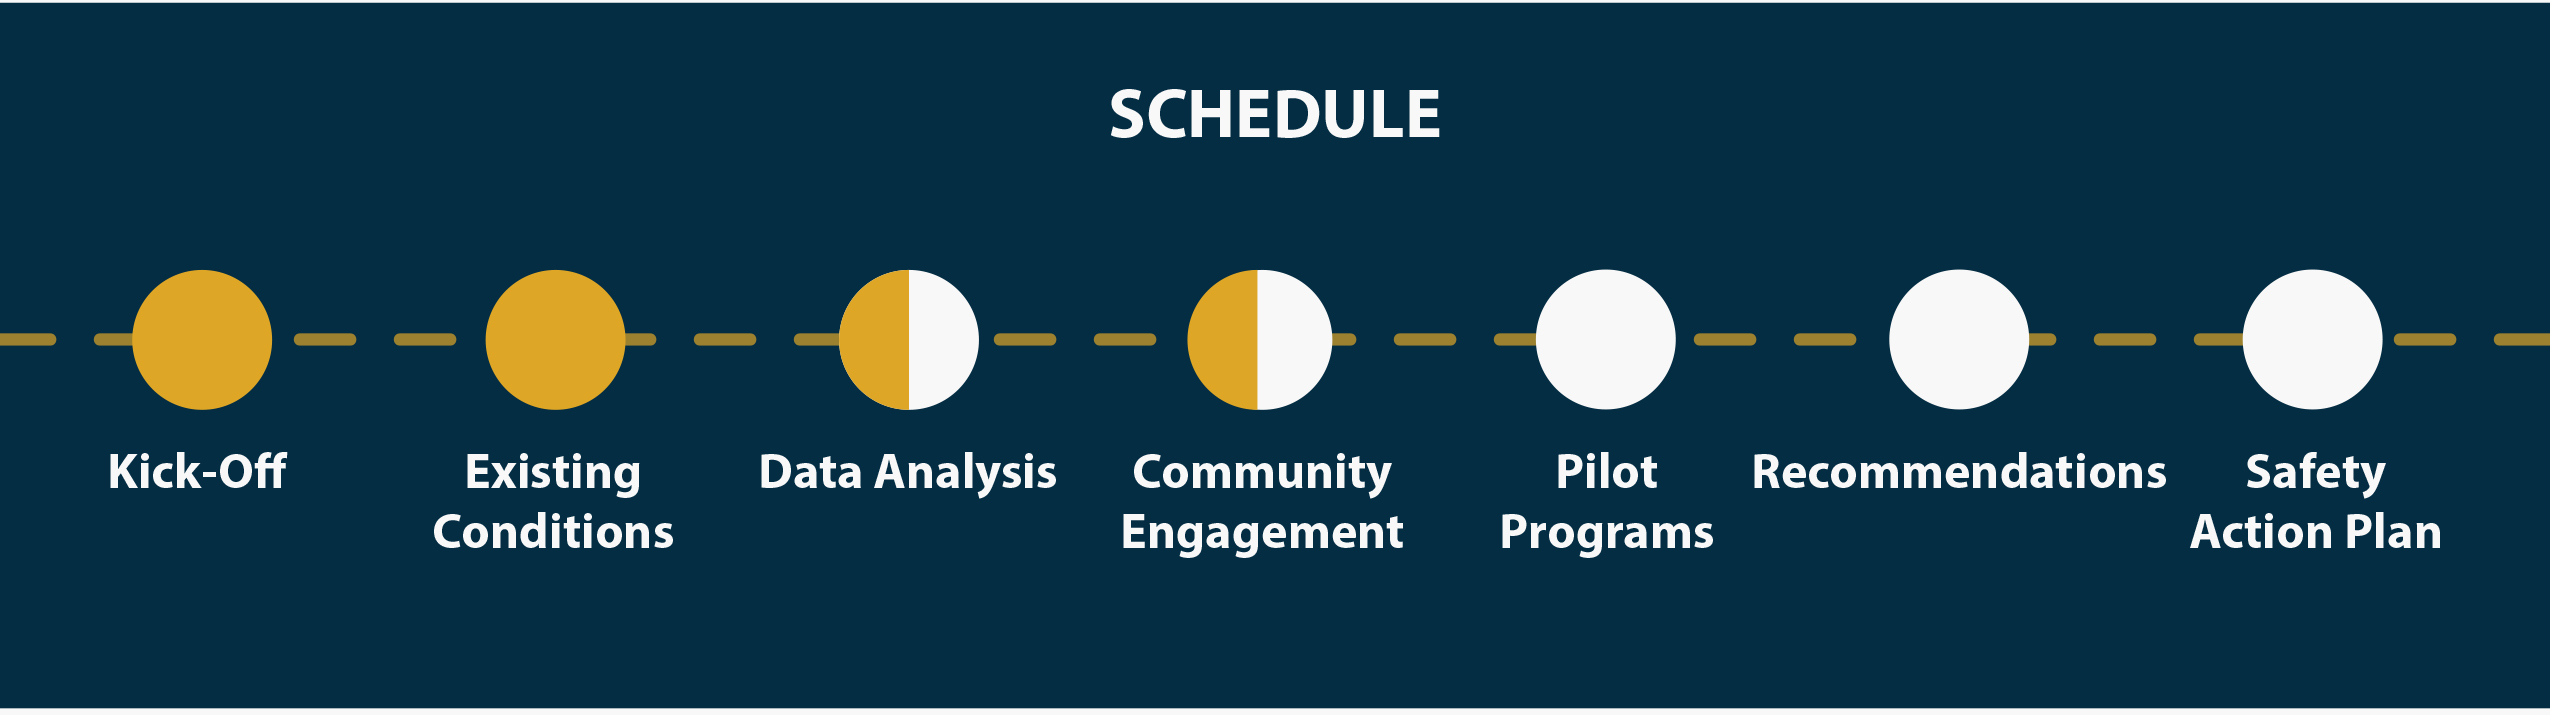 Image of schedule that follows along with the process. Two circles are filled in with yellow  with the titles under them that reads Kick off, Existing Conditions. Two circles are filled in half yellow and white with titles under them, Data Analysis and Community Egagement. Three circles are just white with titles under them that read Pilot Programs, Recommendations & Safety Action Plan